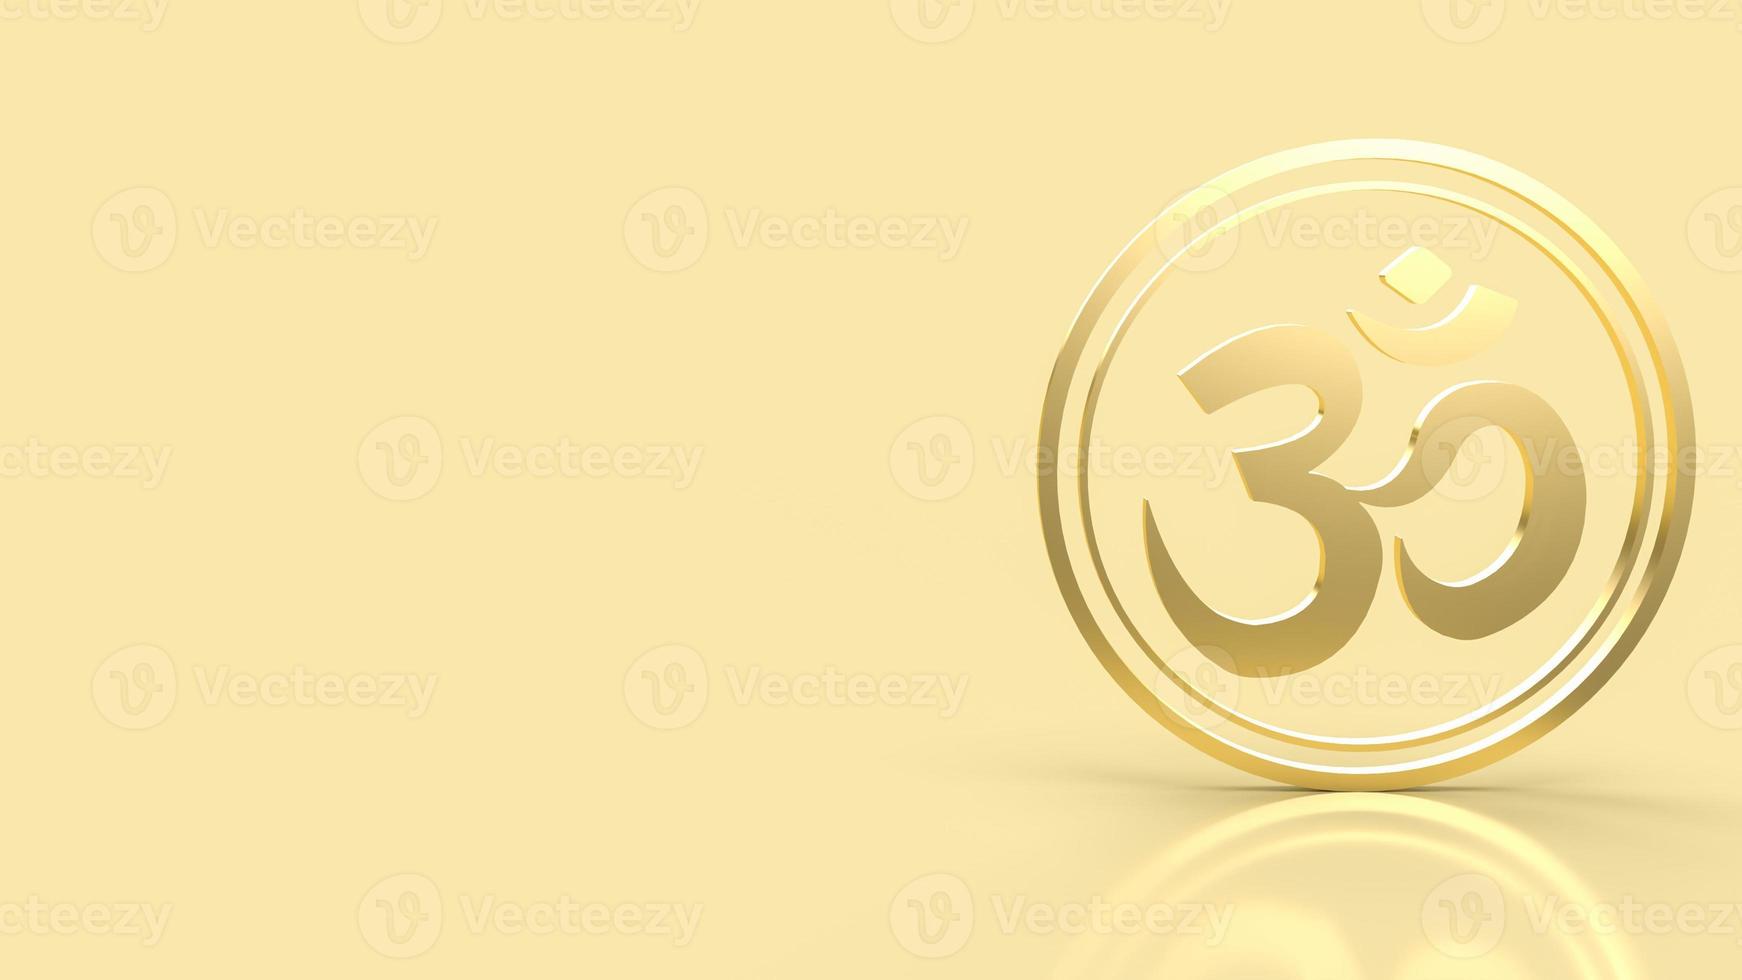 The  hindu ohm or om gold for religion concept 3d rendering photo